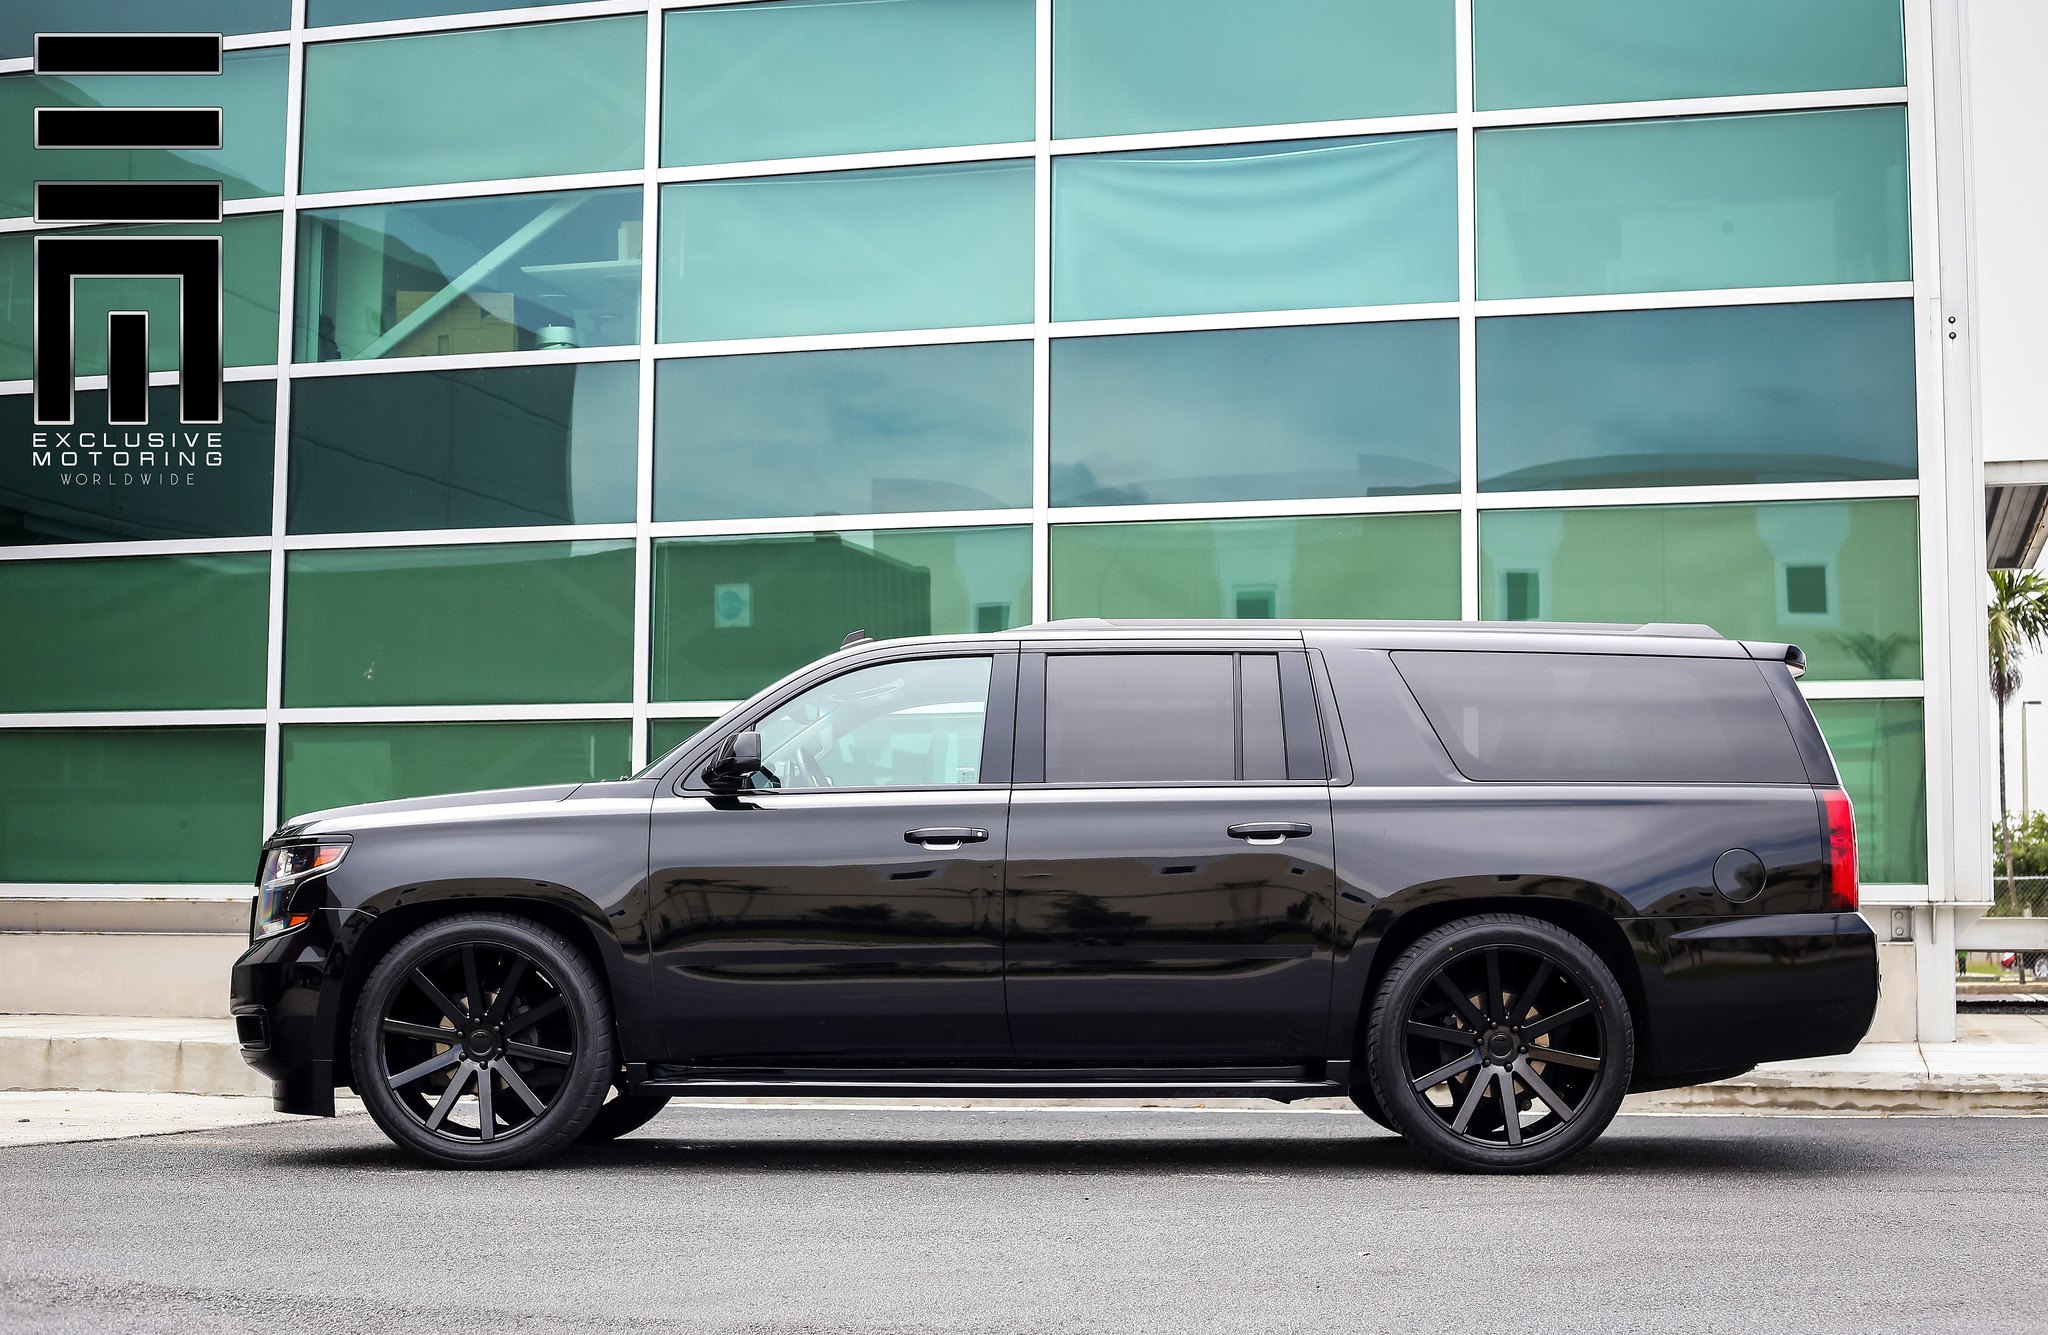 All Black Chevy Suburban Royal Presence - Photo by Exclusive Motoring